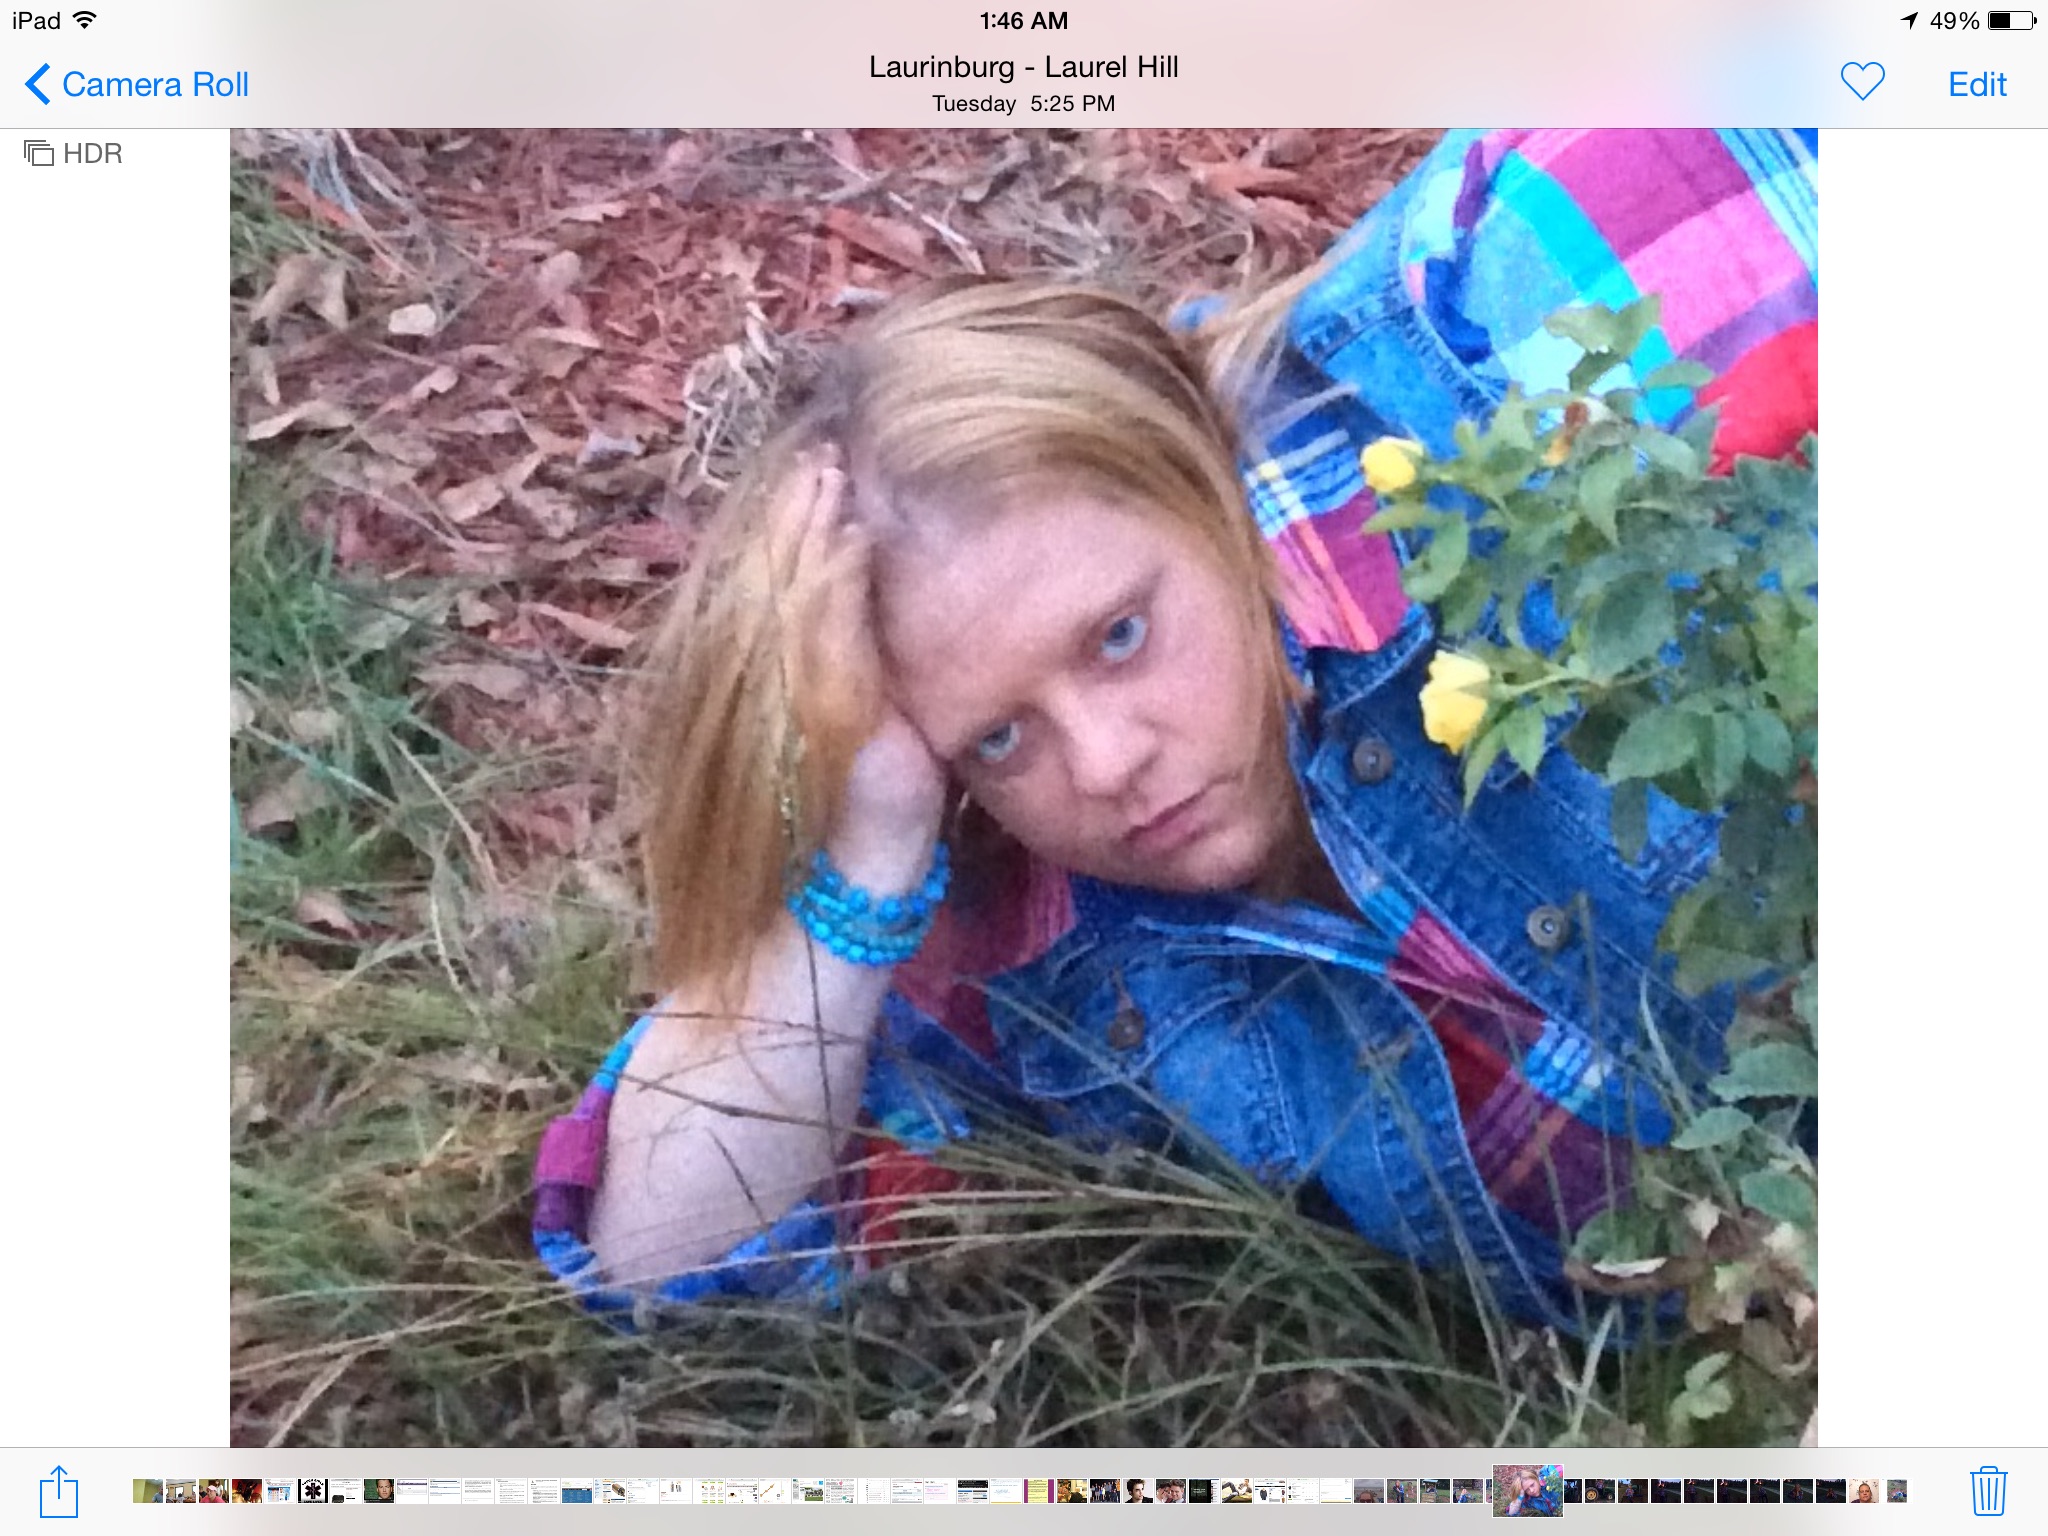 This is a picture of myself taken early November 2014 in my yard.